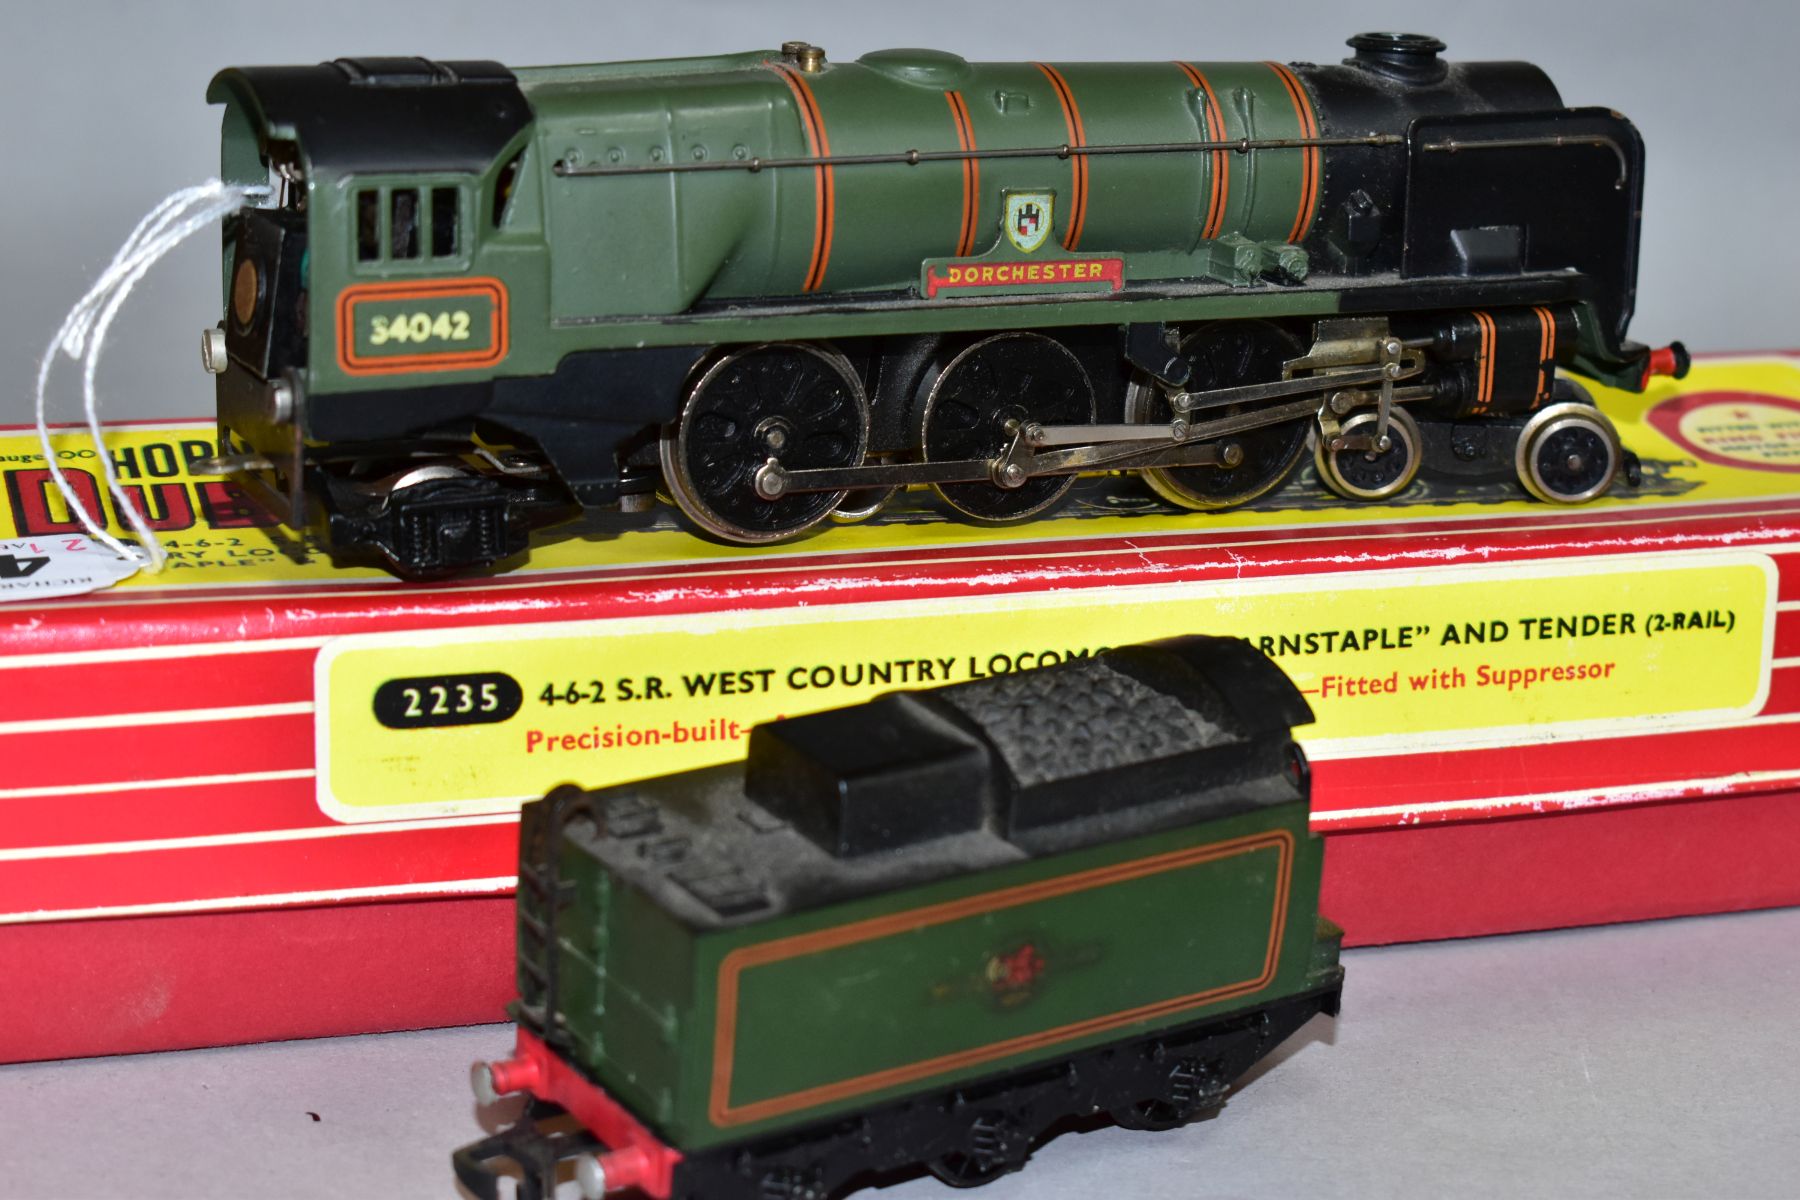 A BOXED HORNBY DUBLO REBUILT WEST COUNTRY CLASS LOCOMOTIVE, 'Dorchester' No 34042, B R lined green - Image 3 of 3